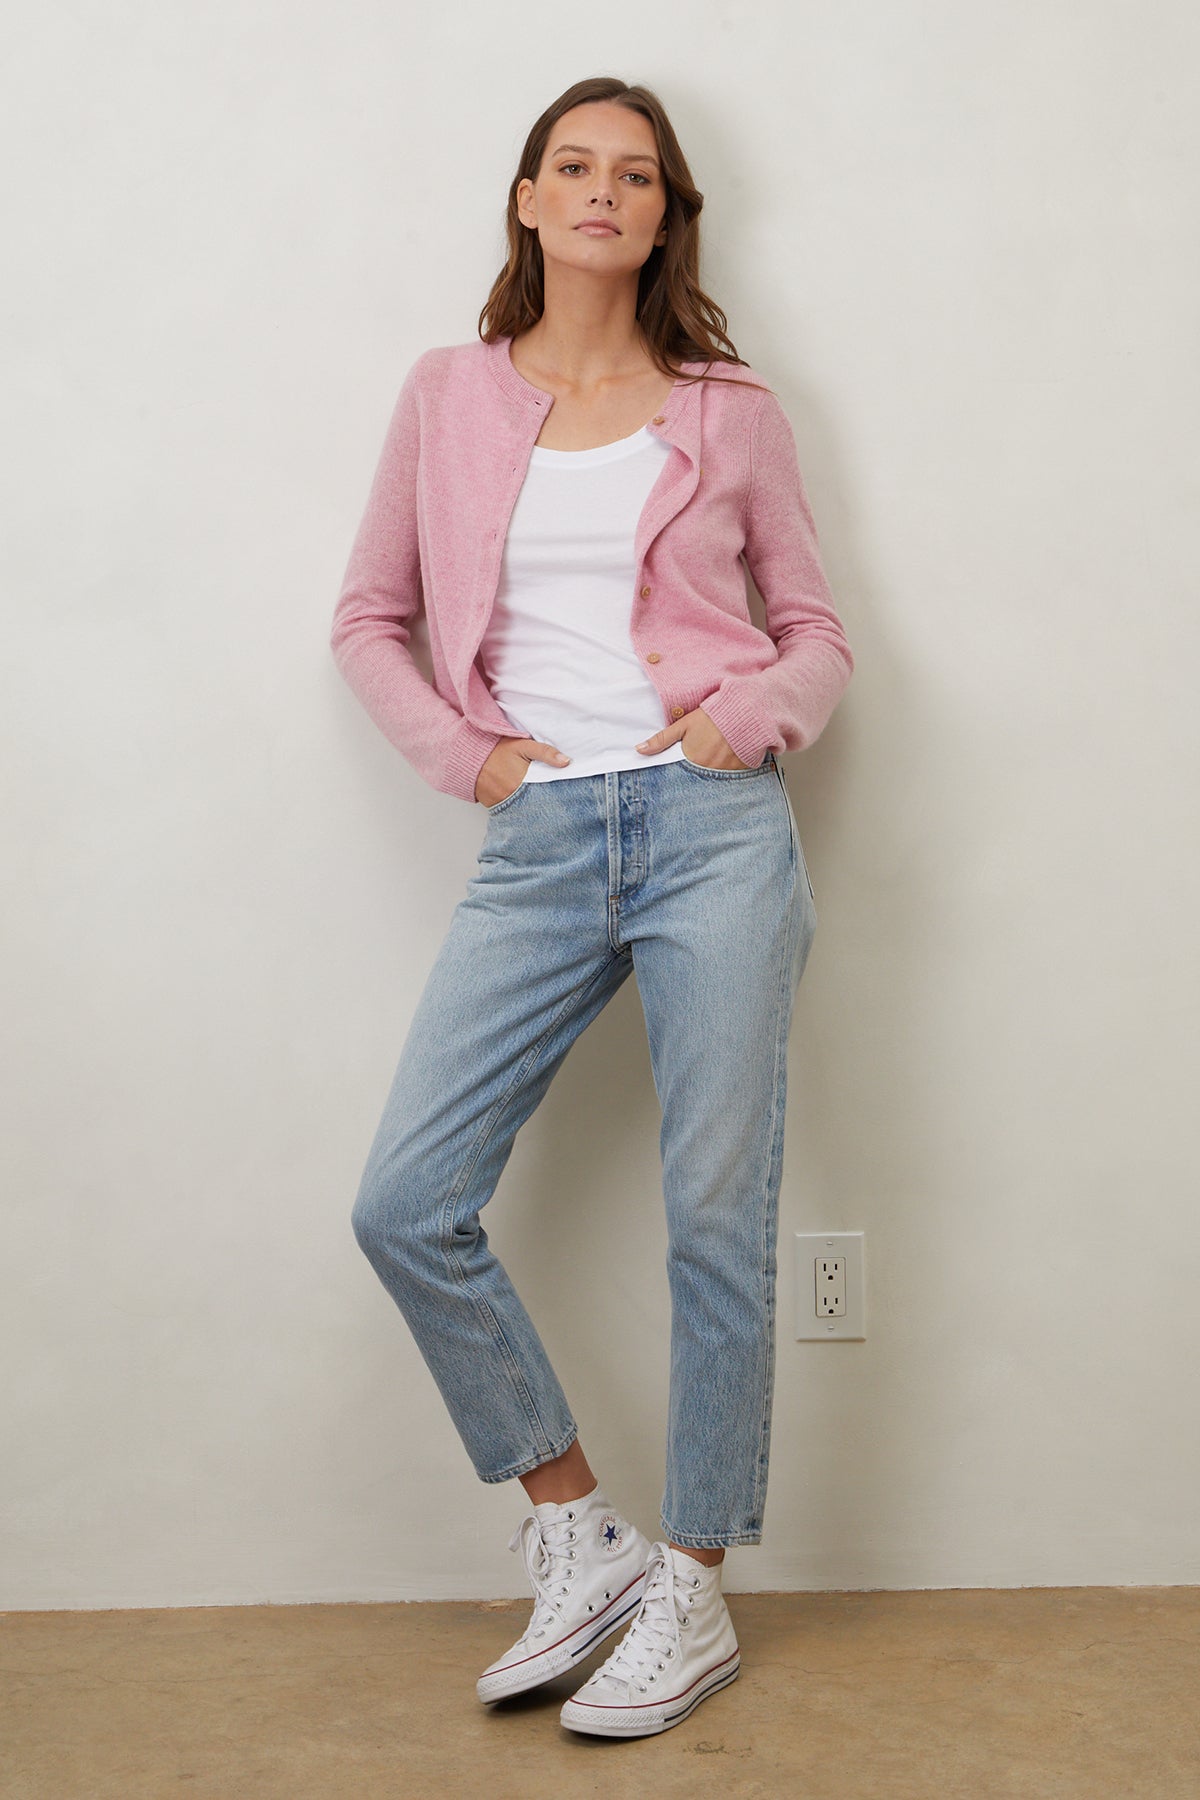   a woman wearing jeans and a NANI CASHMERE CARDIGAN from Velvet by Graham & Spencer. 